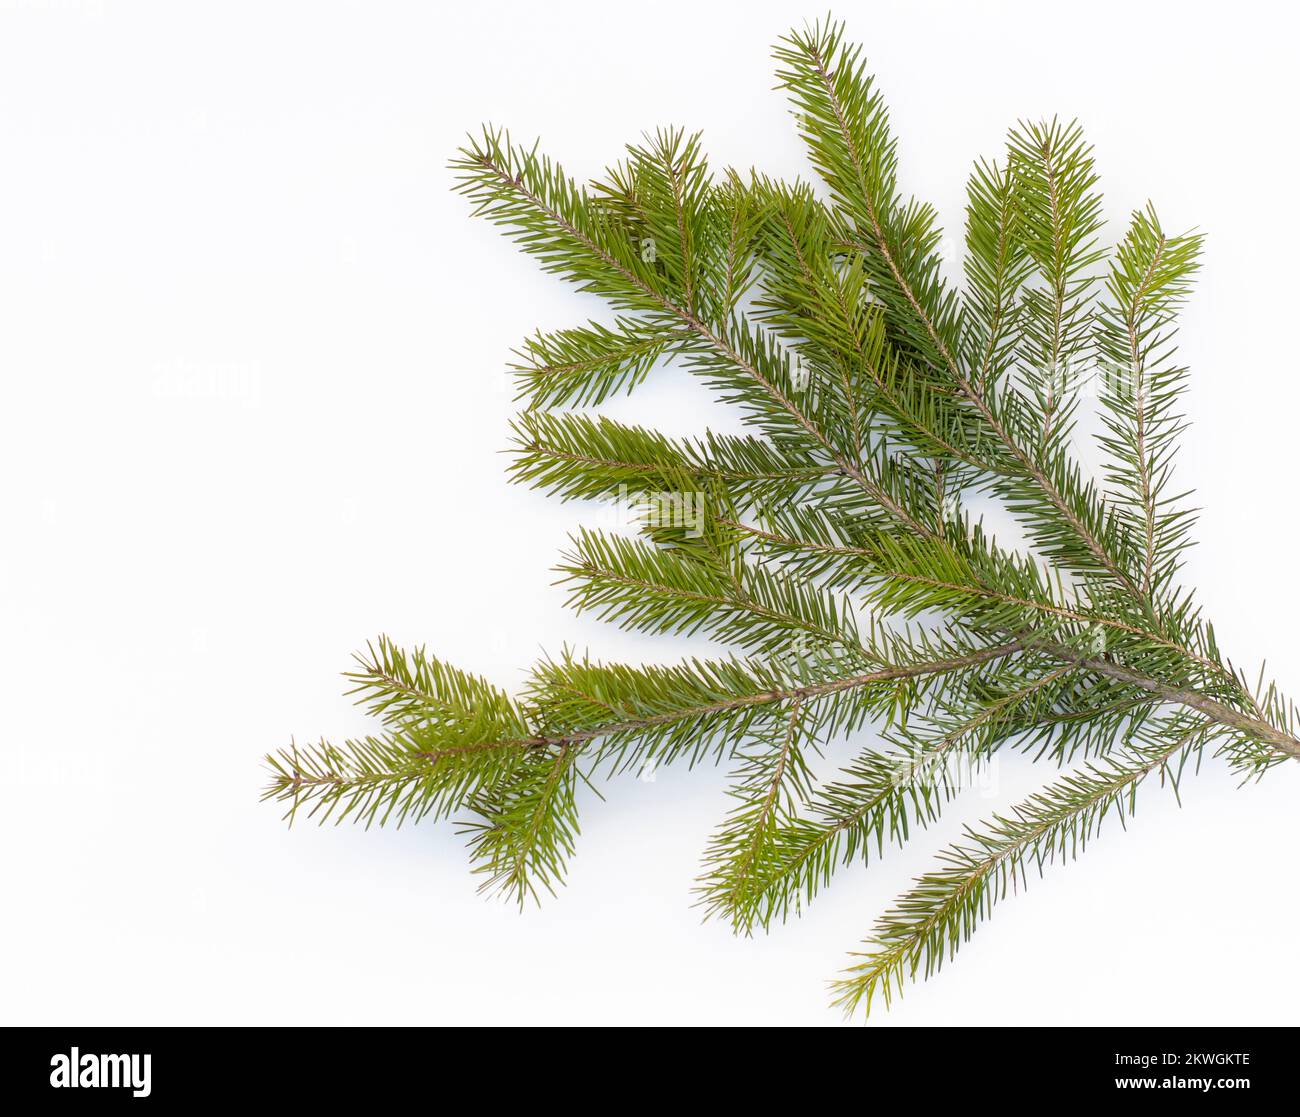 Rocky Mountain Douglas-fir (Pseudotsuga menziesii var. glauca)  branch with needles, against a white background. Stock Photo